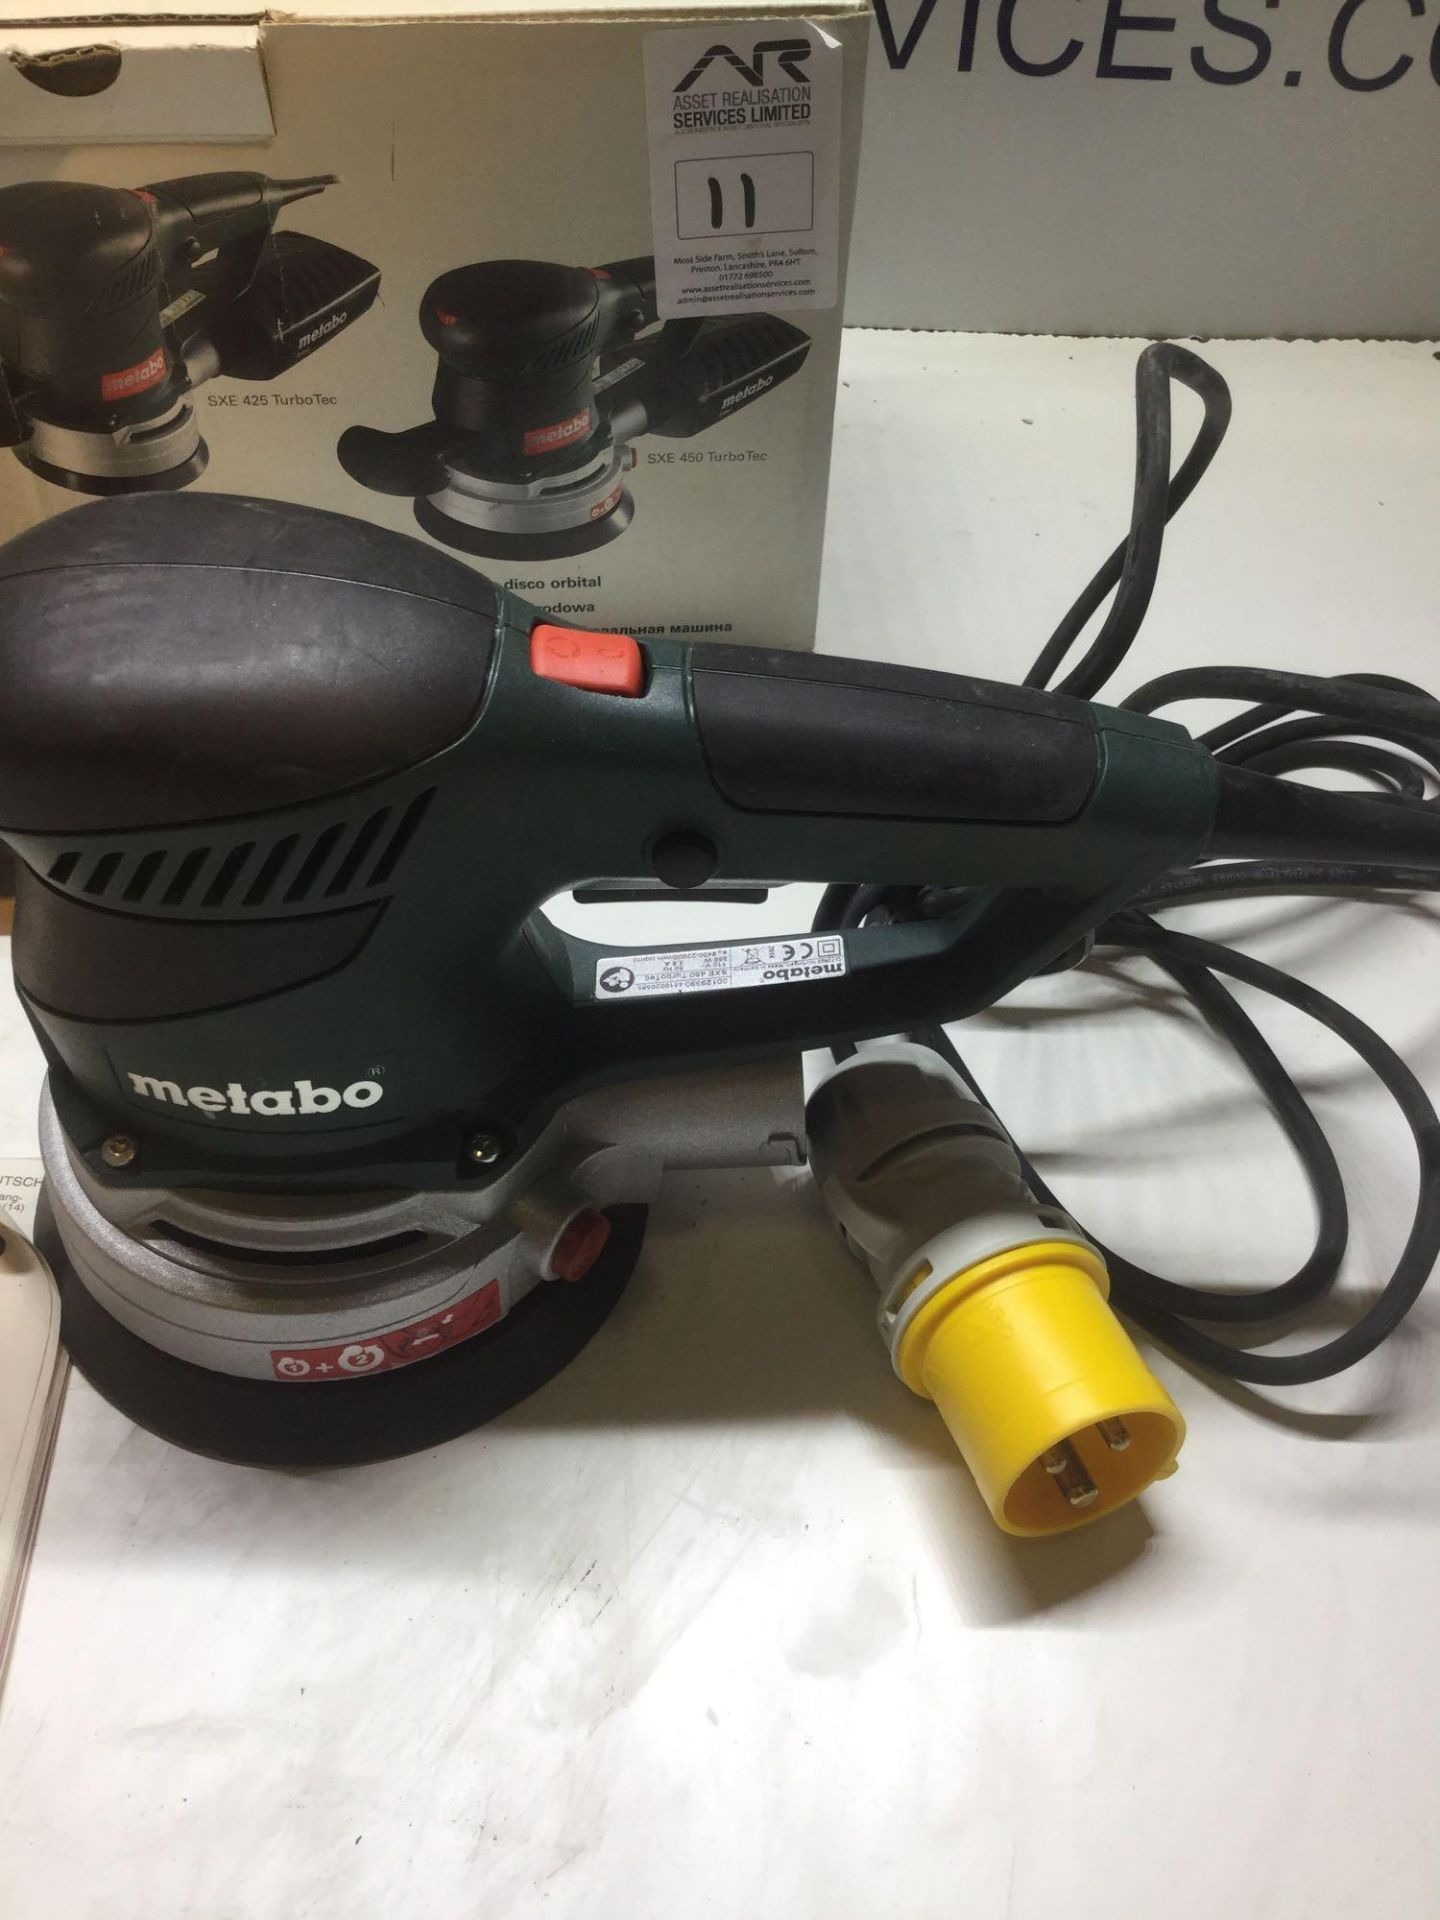 Metabo SXE 450 Orbital Sander c/w Filter & Attachments, 110v Boxed as New - Image 2 of 5